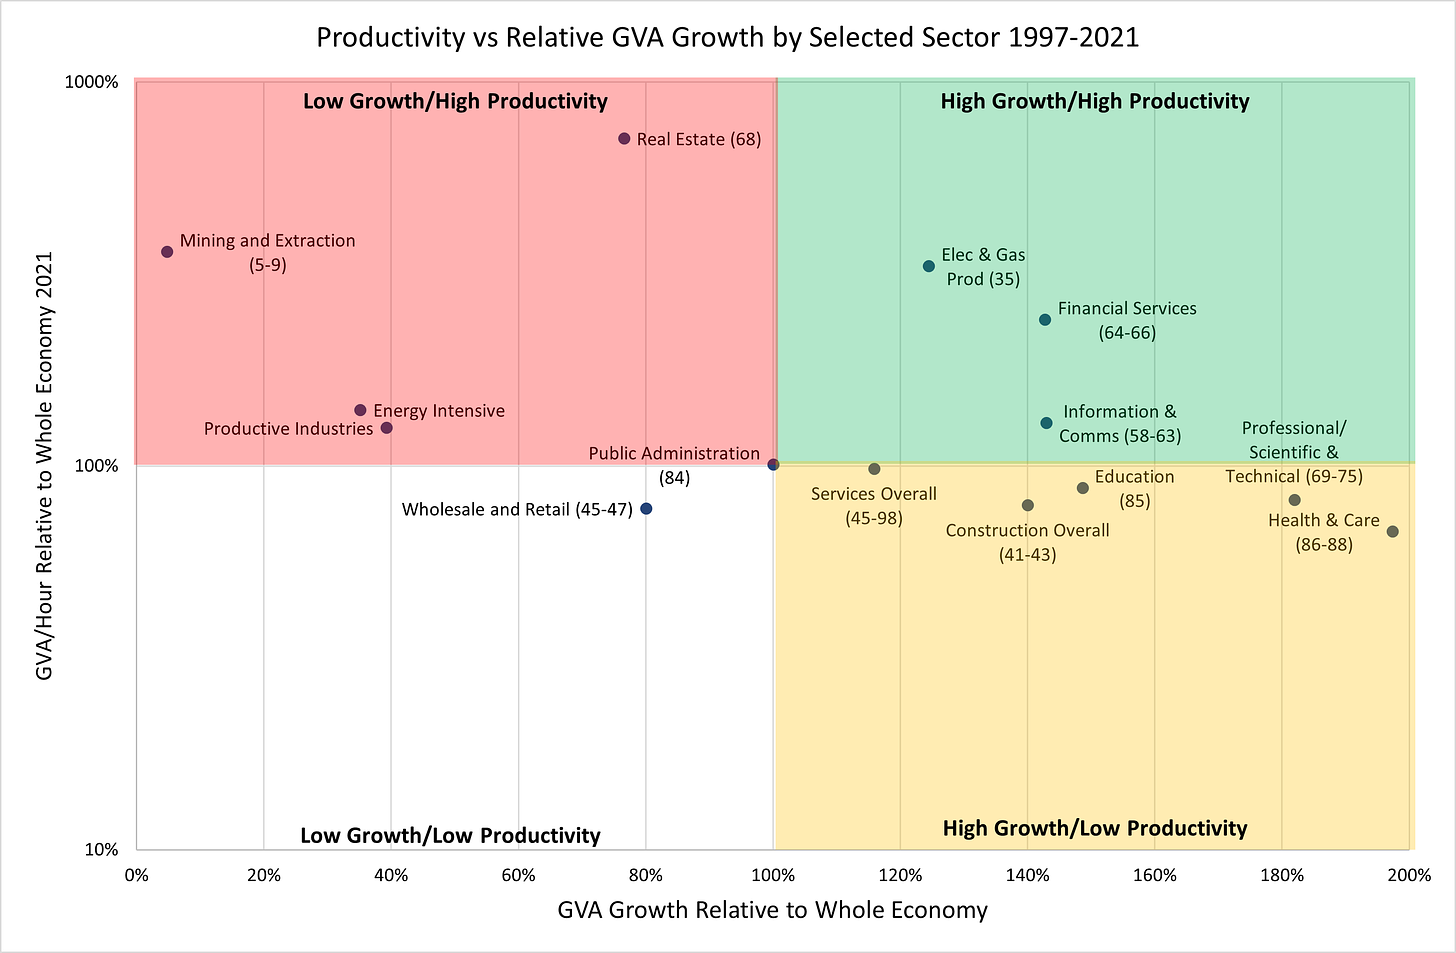 Productive Industries with higher productivity growing more slowly than whole economy